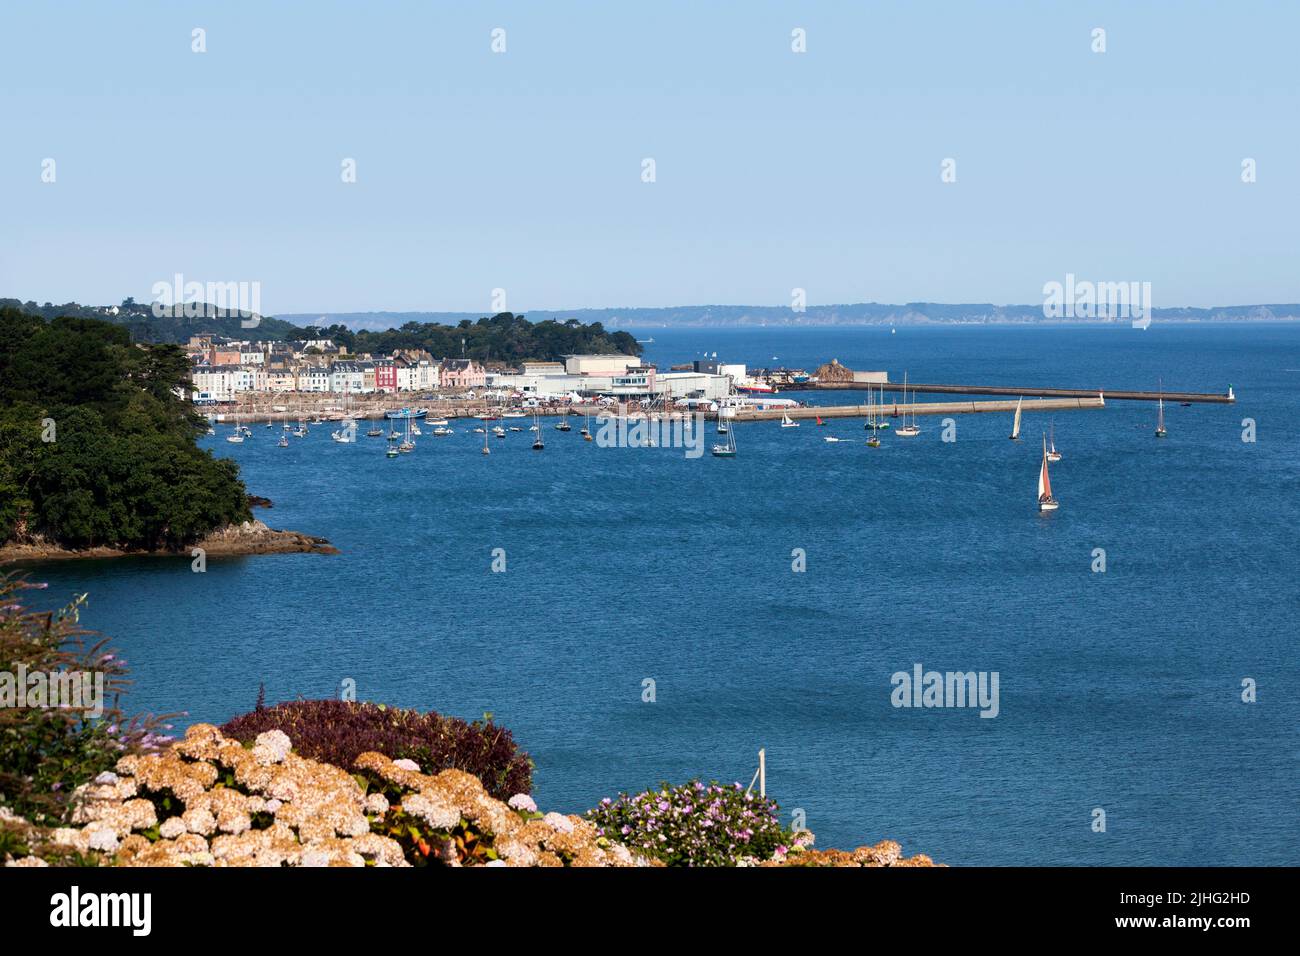 Port of Rosmeur overfloaded with sailboats during the Douarnenez maritime festival. Stock Photo